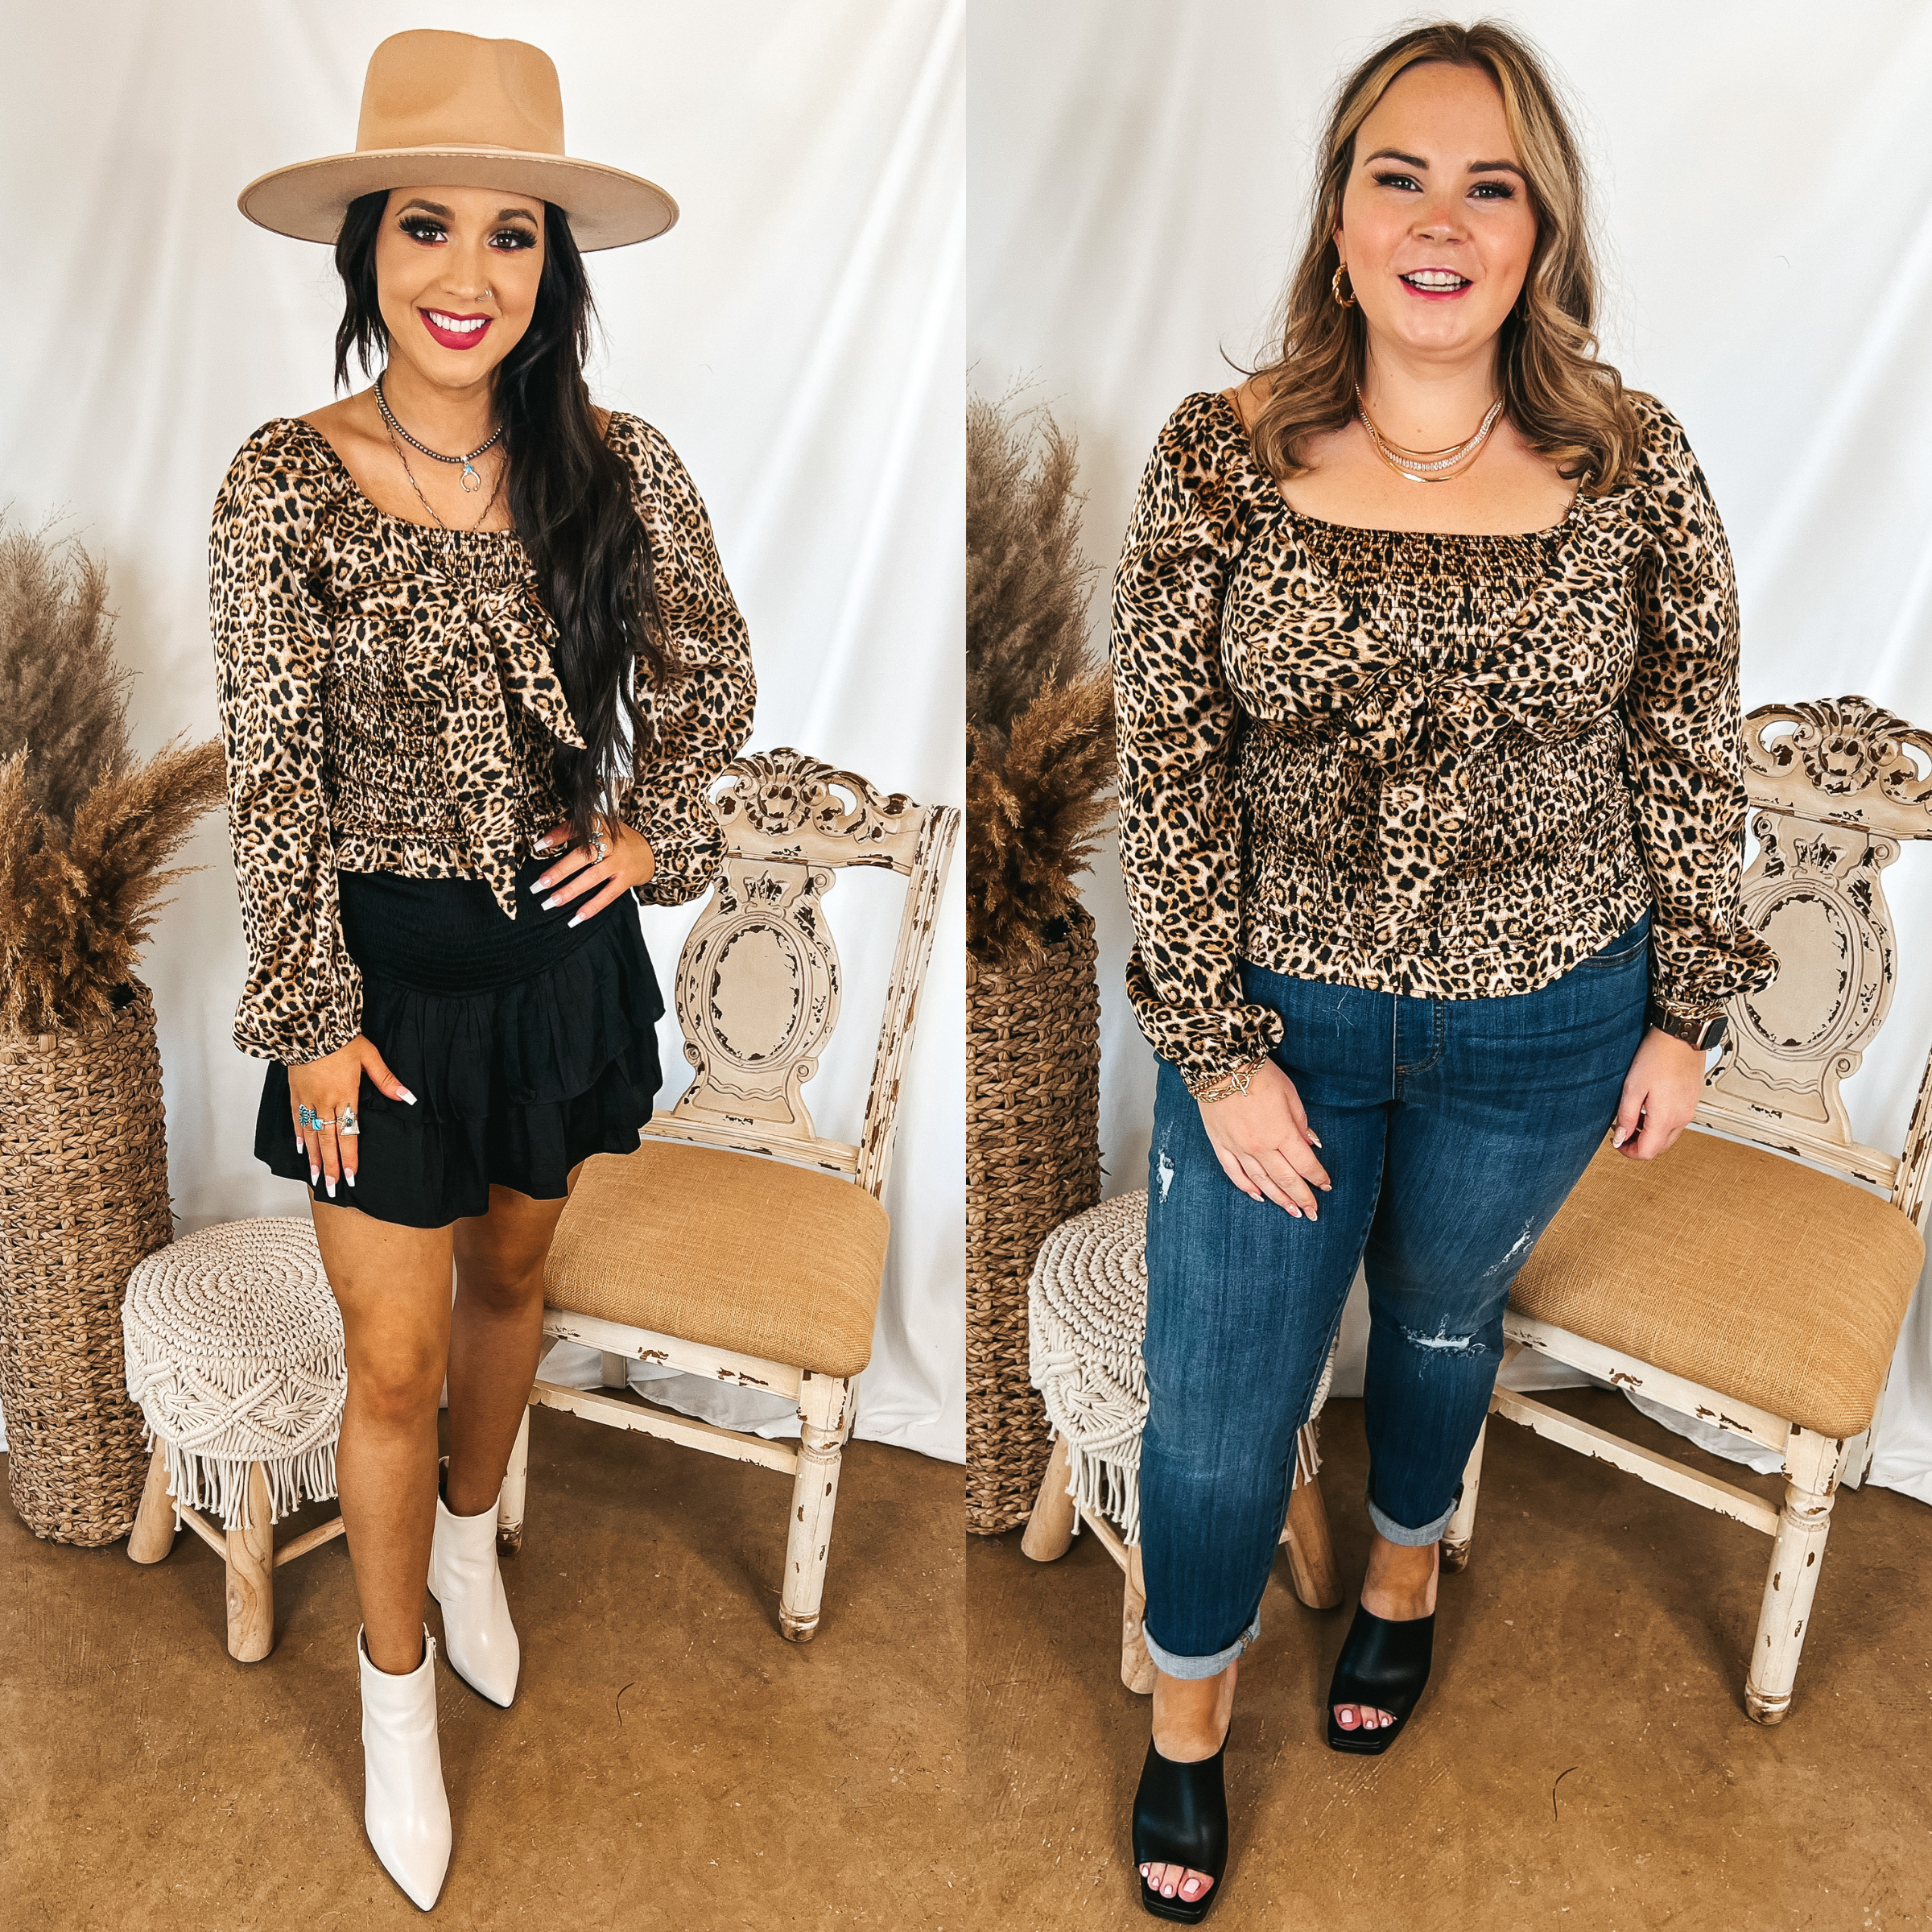 Models are wearing a leopard print satin top that has a smocked bodice with a tie across the front. Size small model has it paired with a black skirt, white booties, and a tan hat. Size large model has it paired  with skinny jeggings, black heels, and gold jewelry.